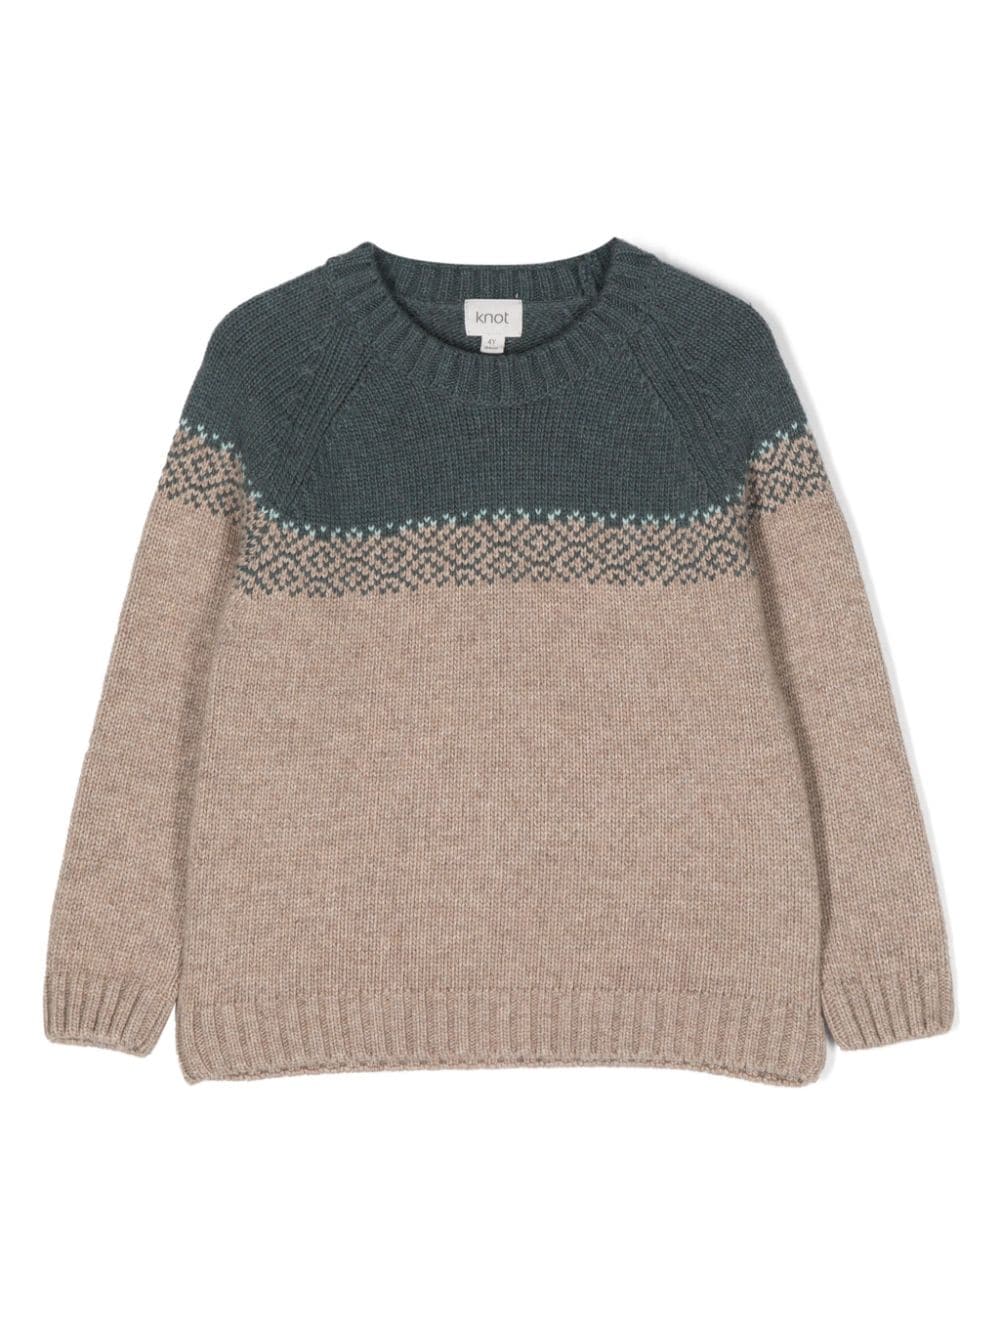 Image 1 of Knot Mountain chunky-knit jumper